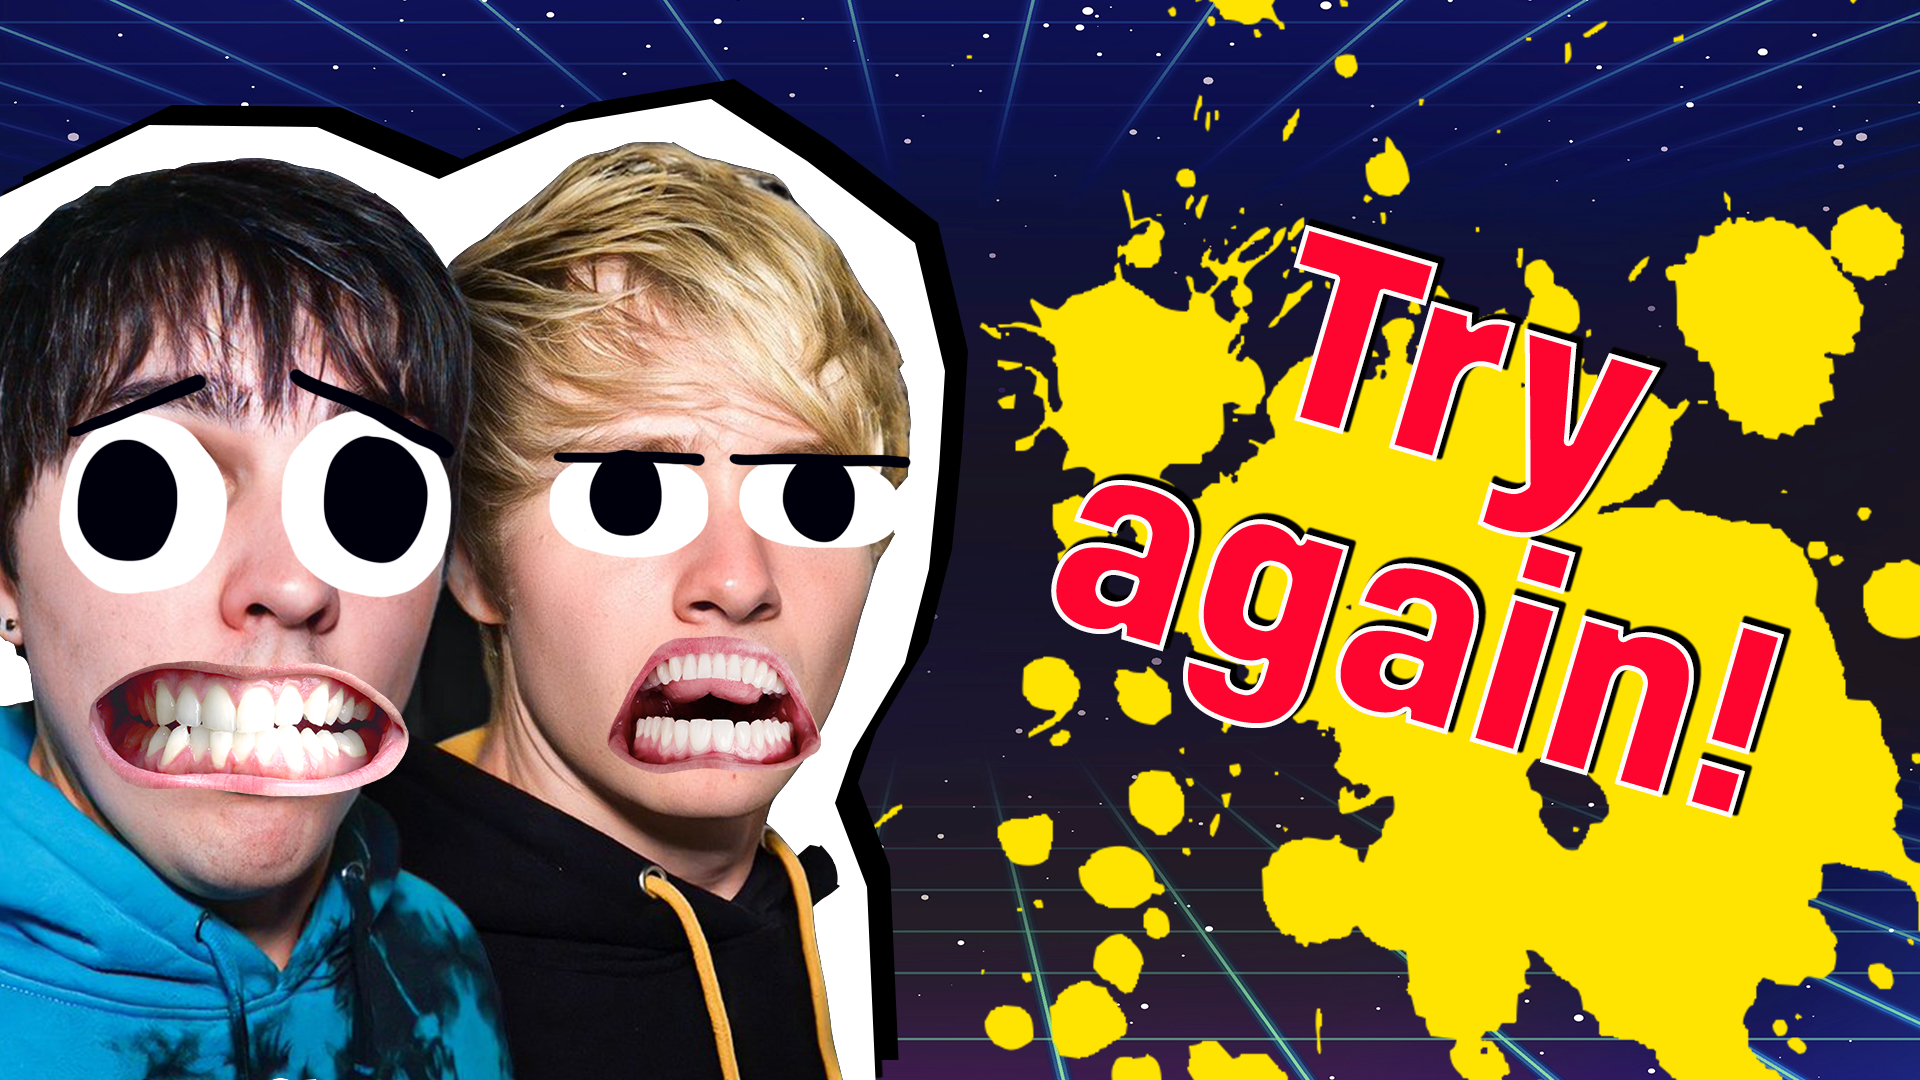 Sam and Colby Quiz How Much Do You Know?